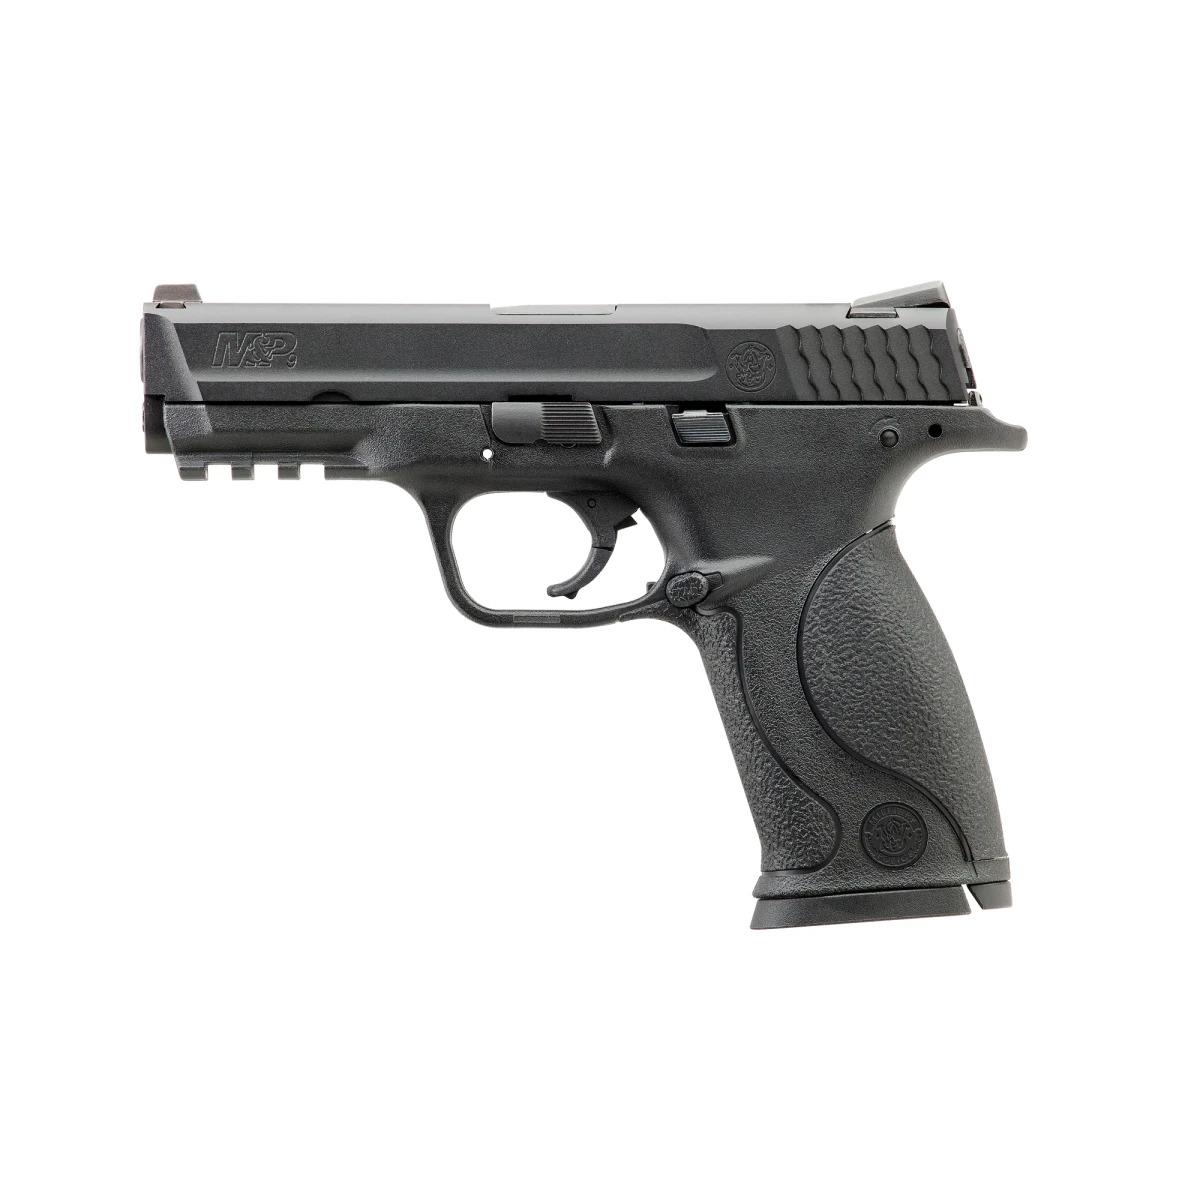 Smith & Wesson M&P9 6 mm, Gas, < 1,0 J